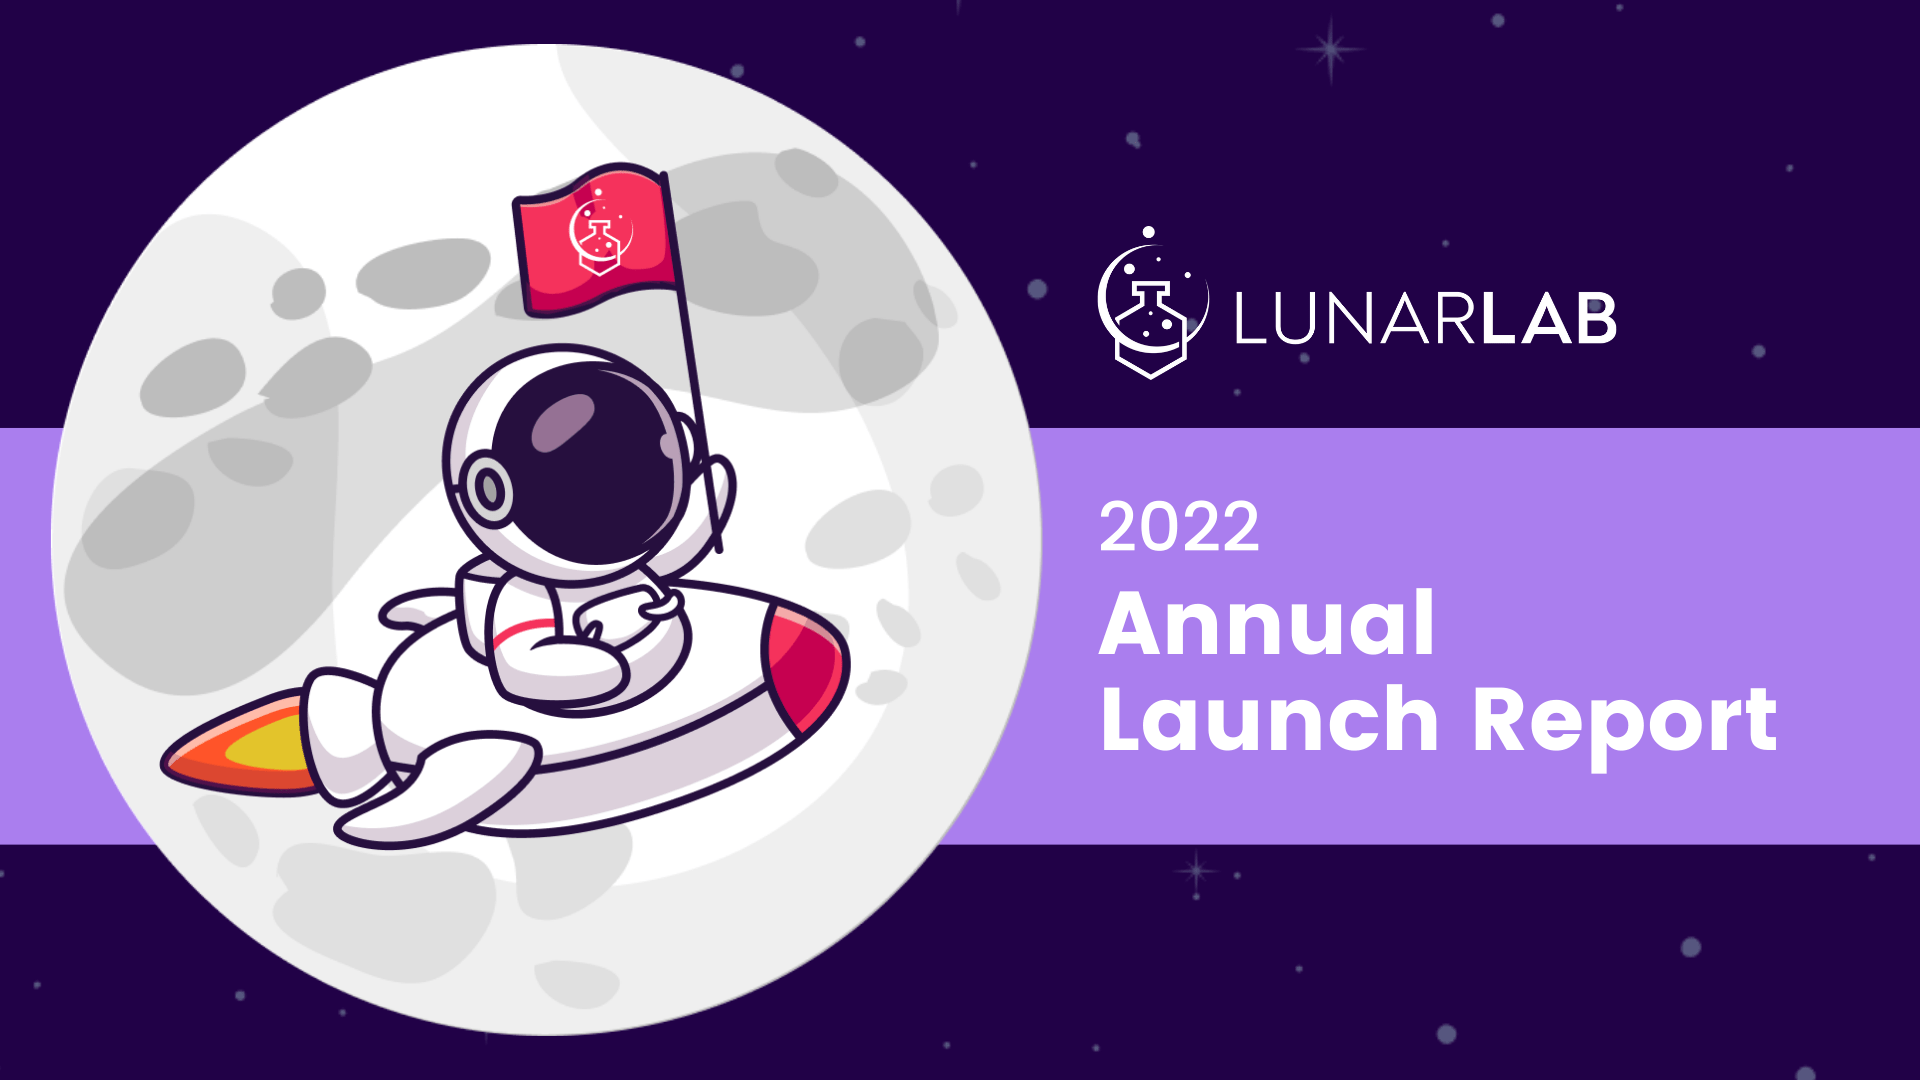 Moon with an astronaut flying over it on a purple background. Text reads "LunarLab 2022 Annual Launch Report"